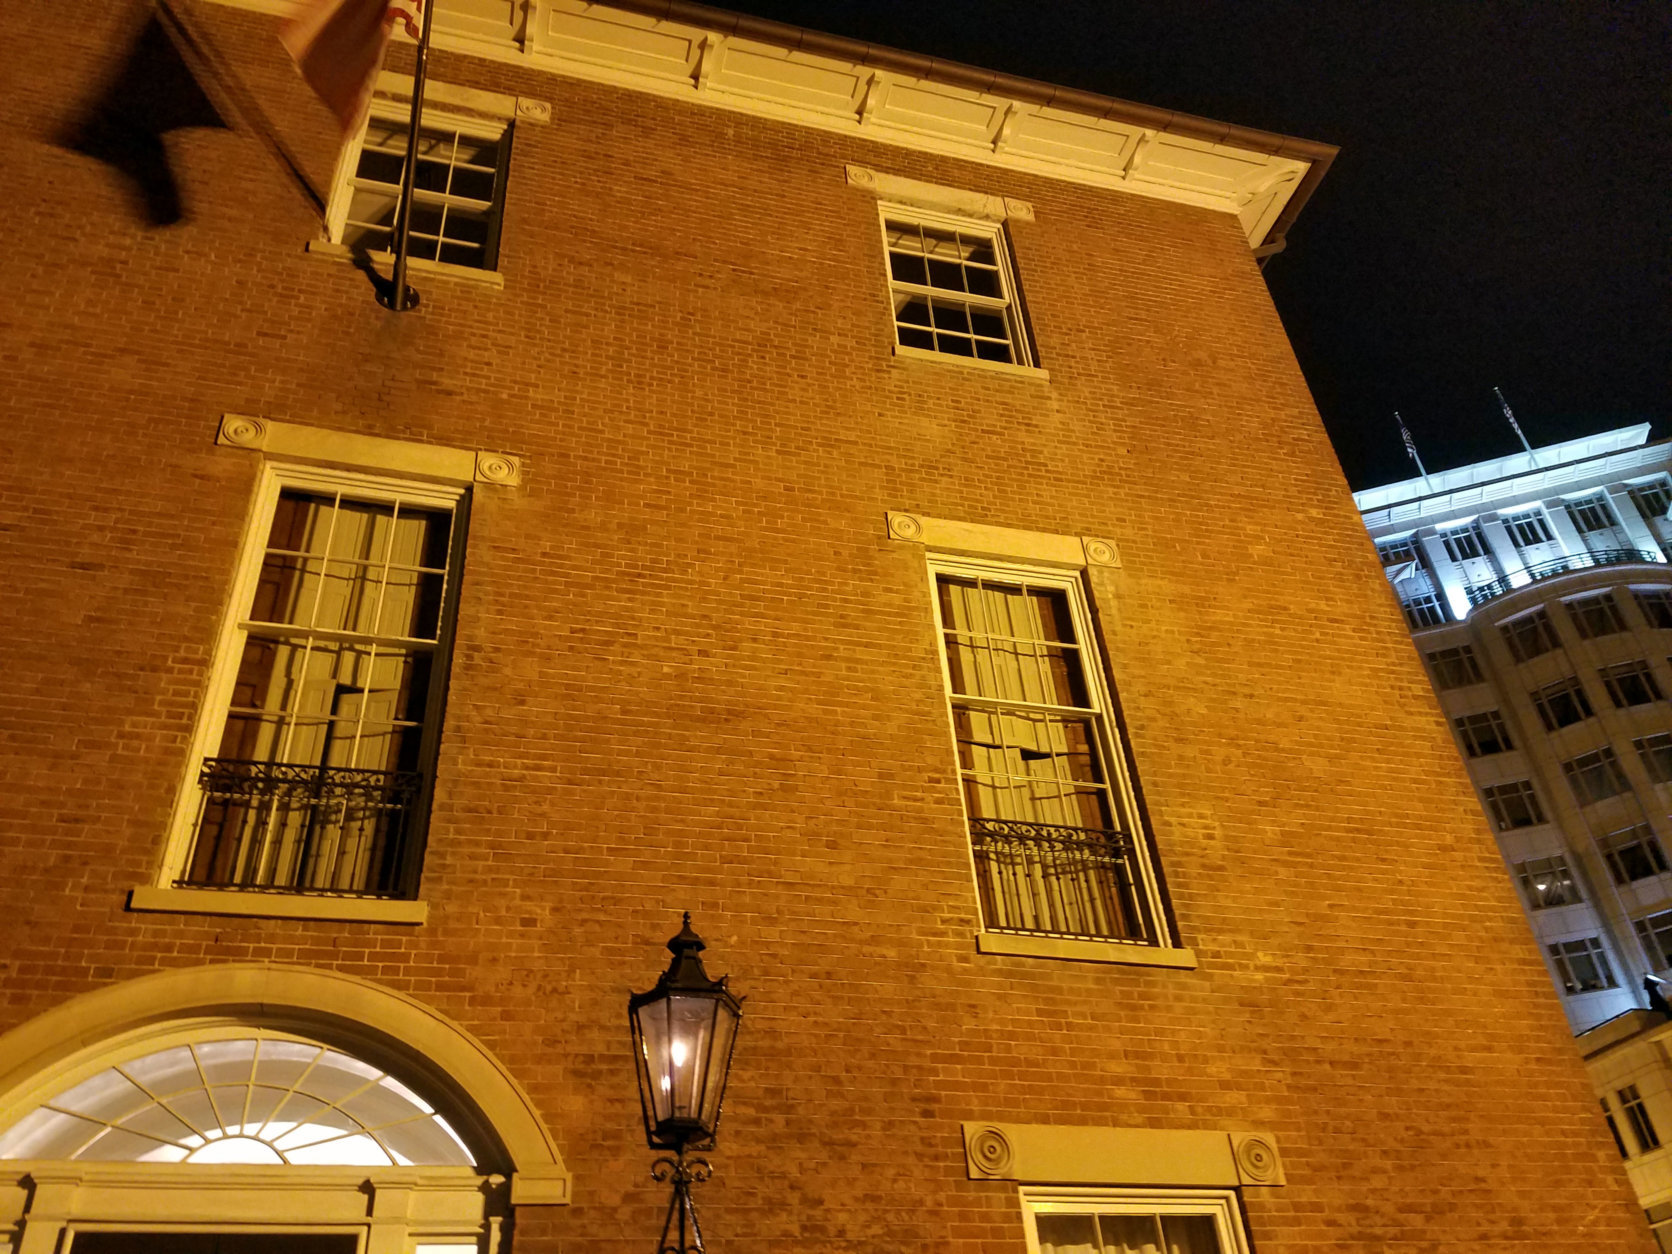 Stephen Decatur allegedly waits in the windows of the Decatur House. (WTOP/Will Vitka)